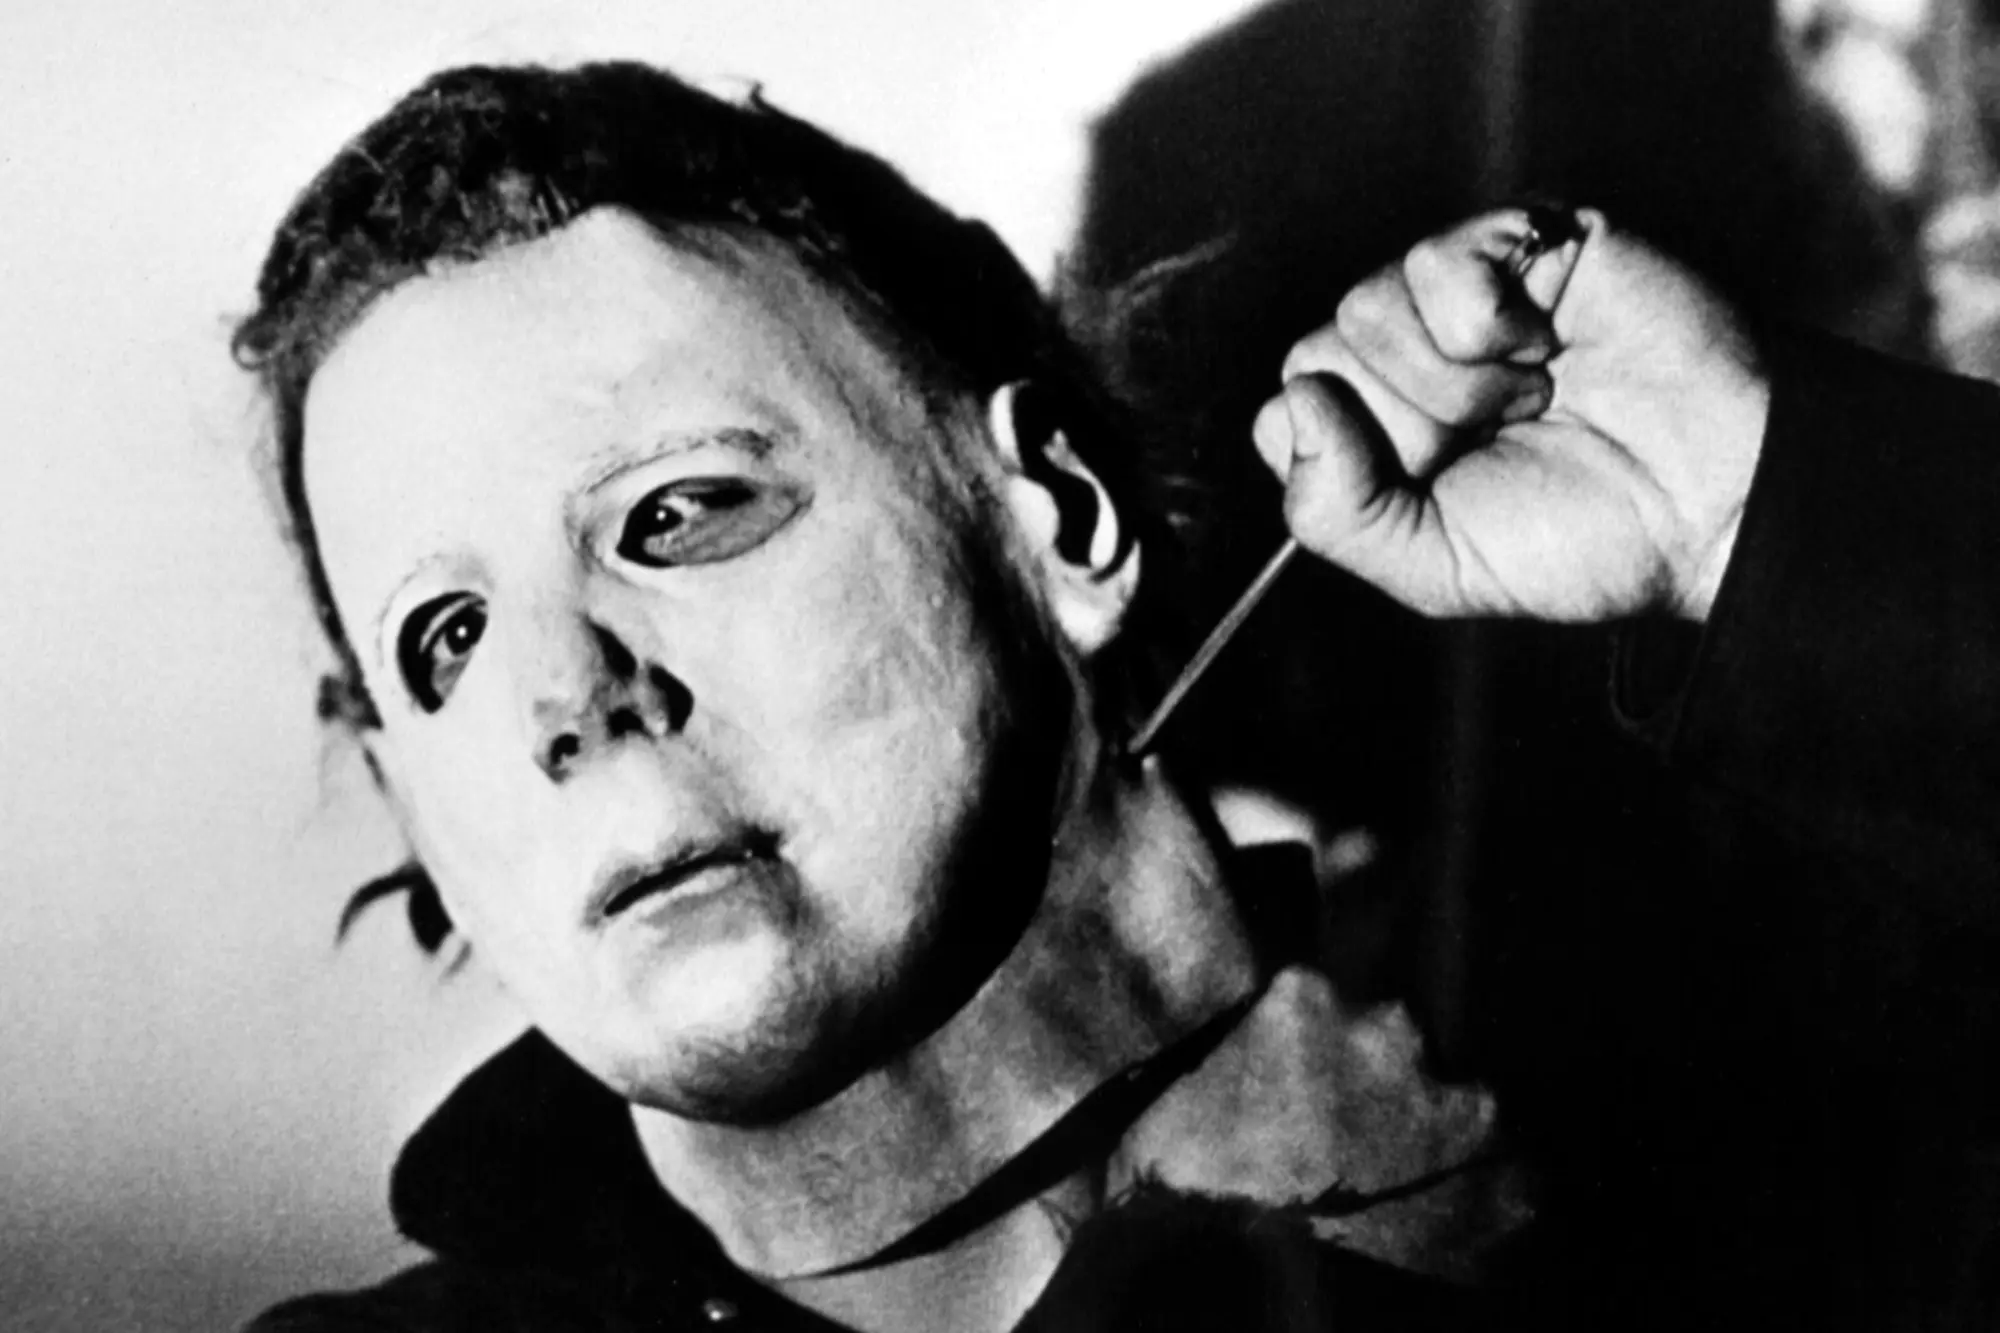 Michael-Myers'-mask-being-a-William-Shatner-mask